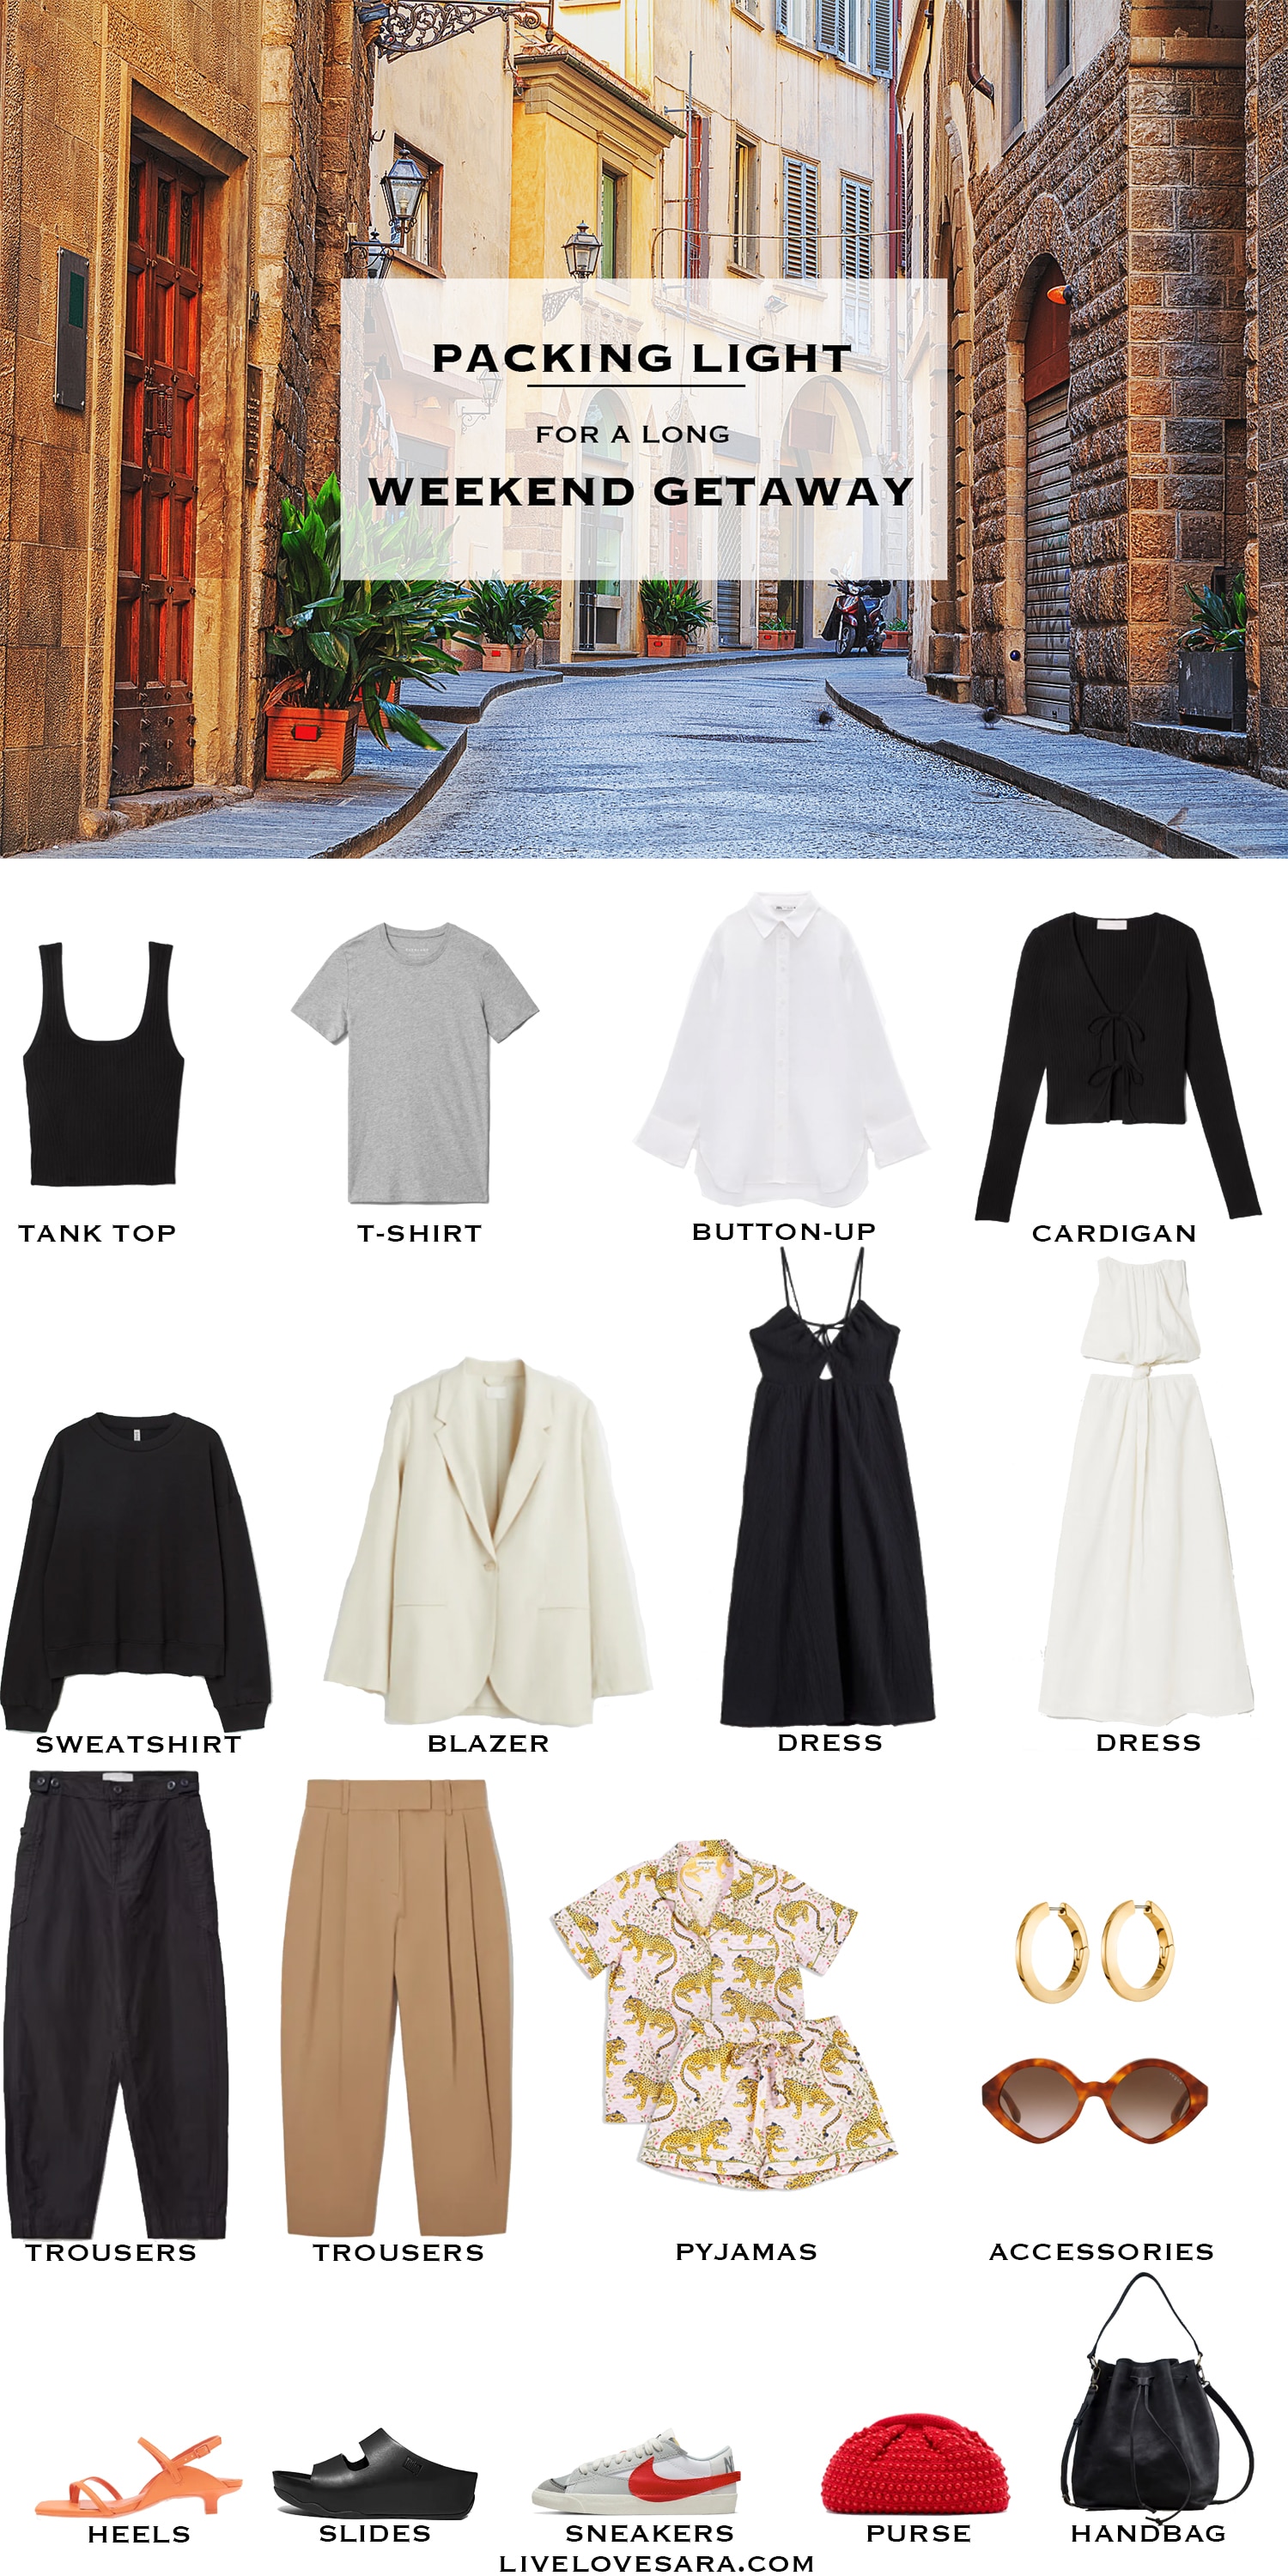 A white background with the image of an Italian city street at the top. Below that is a list of 18 items to pack for a weekend getaway.